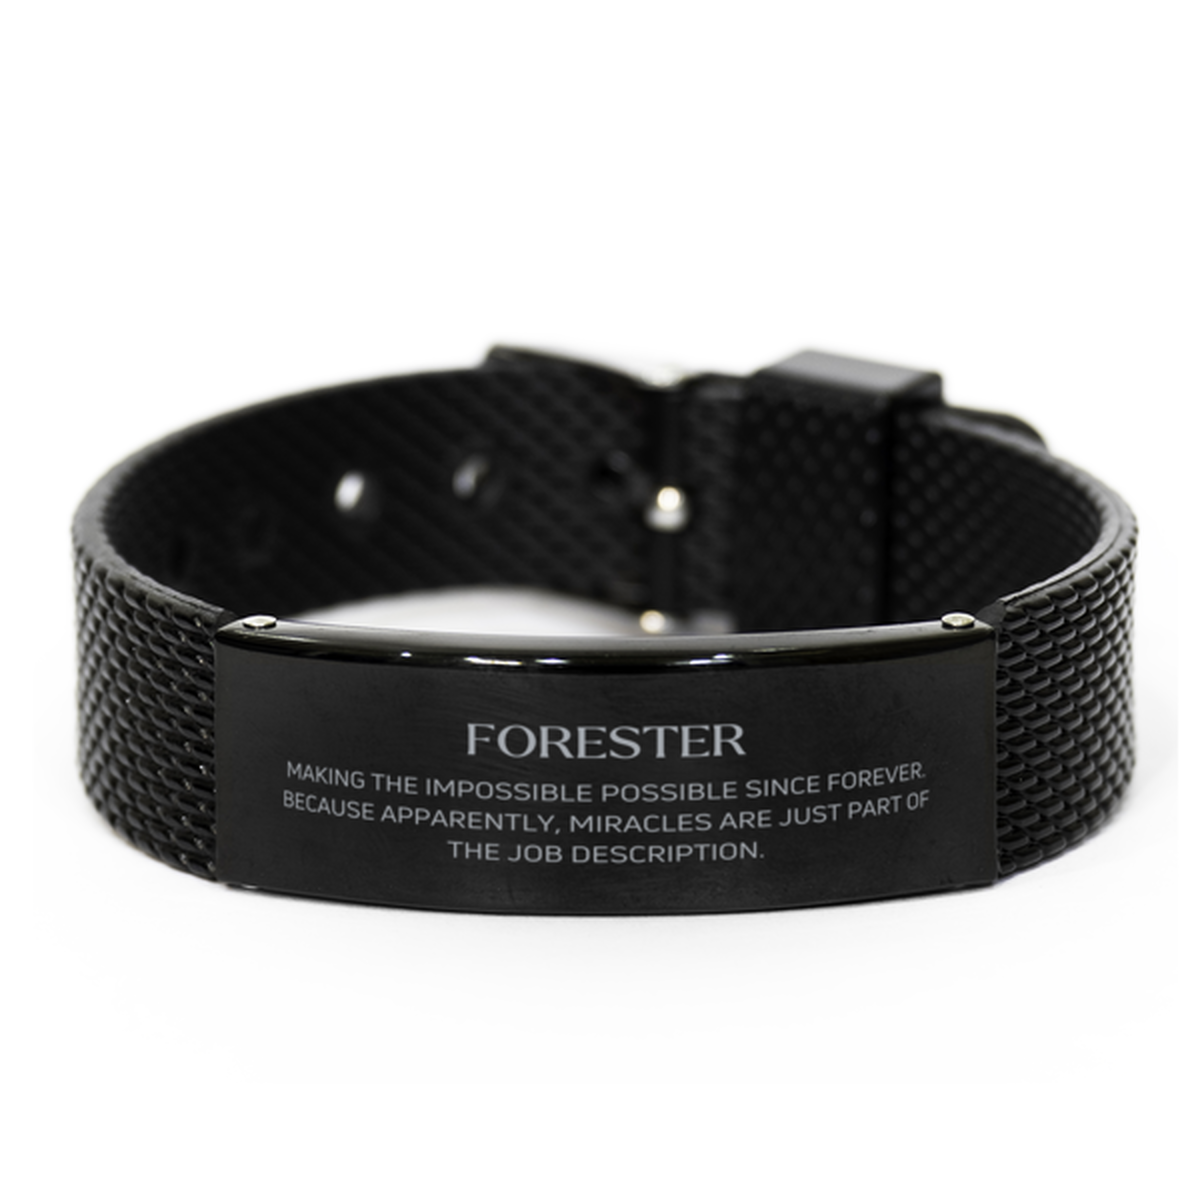 Funny Forester Gifts, Miracles are just part of the job description, Inspirational Birthday Black Shark Mesh Bracelet For Forester, Men, Women, Coworkers, Friends, Boss